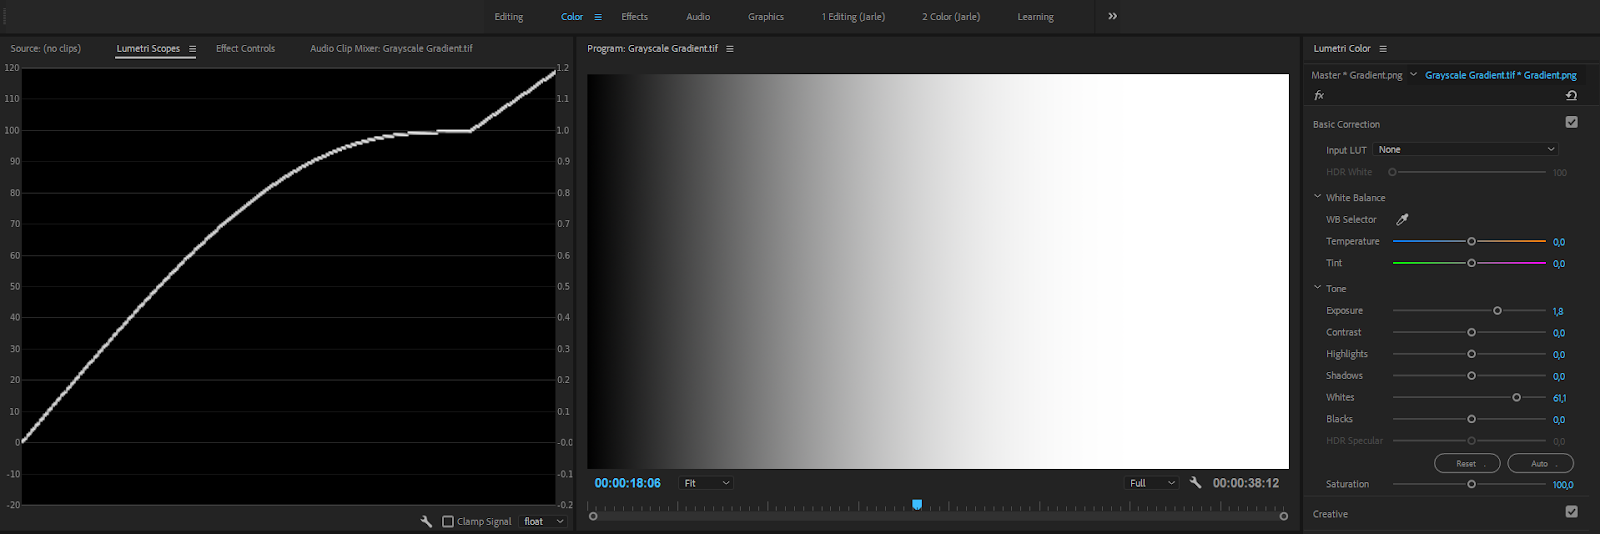 Premiere Color Correction: linear gradient after Exposure increase